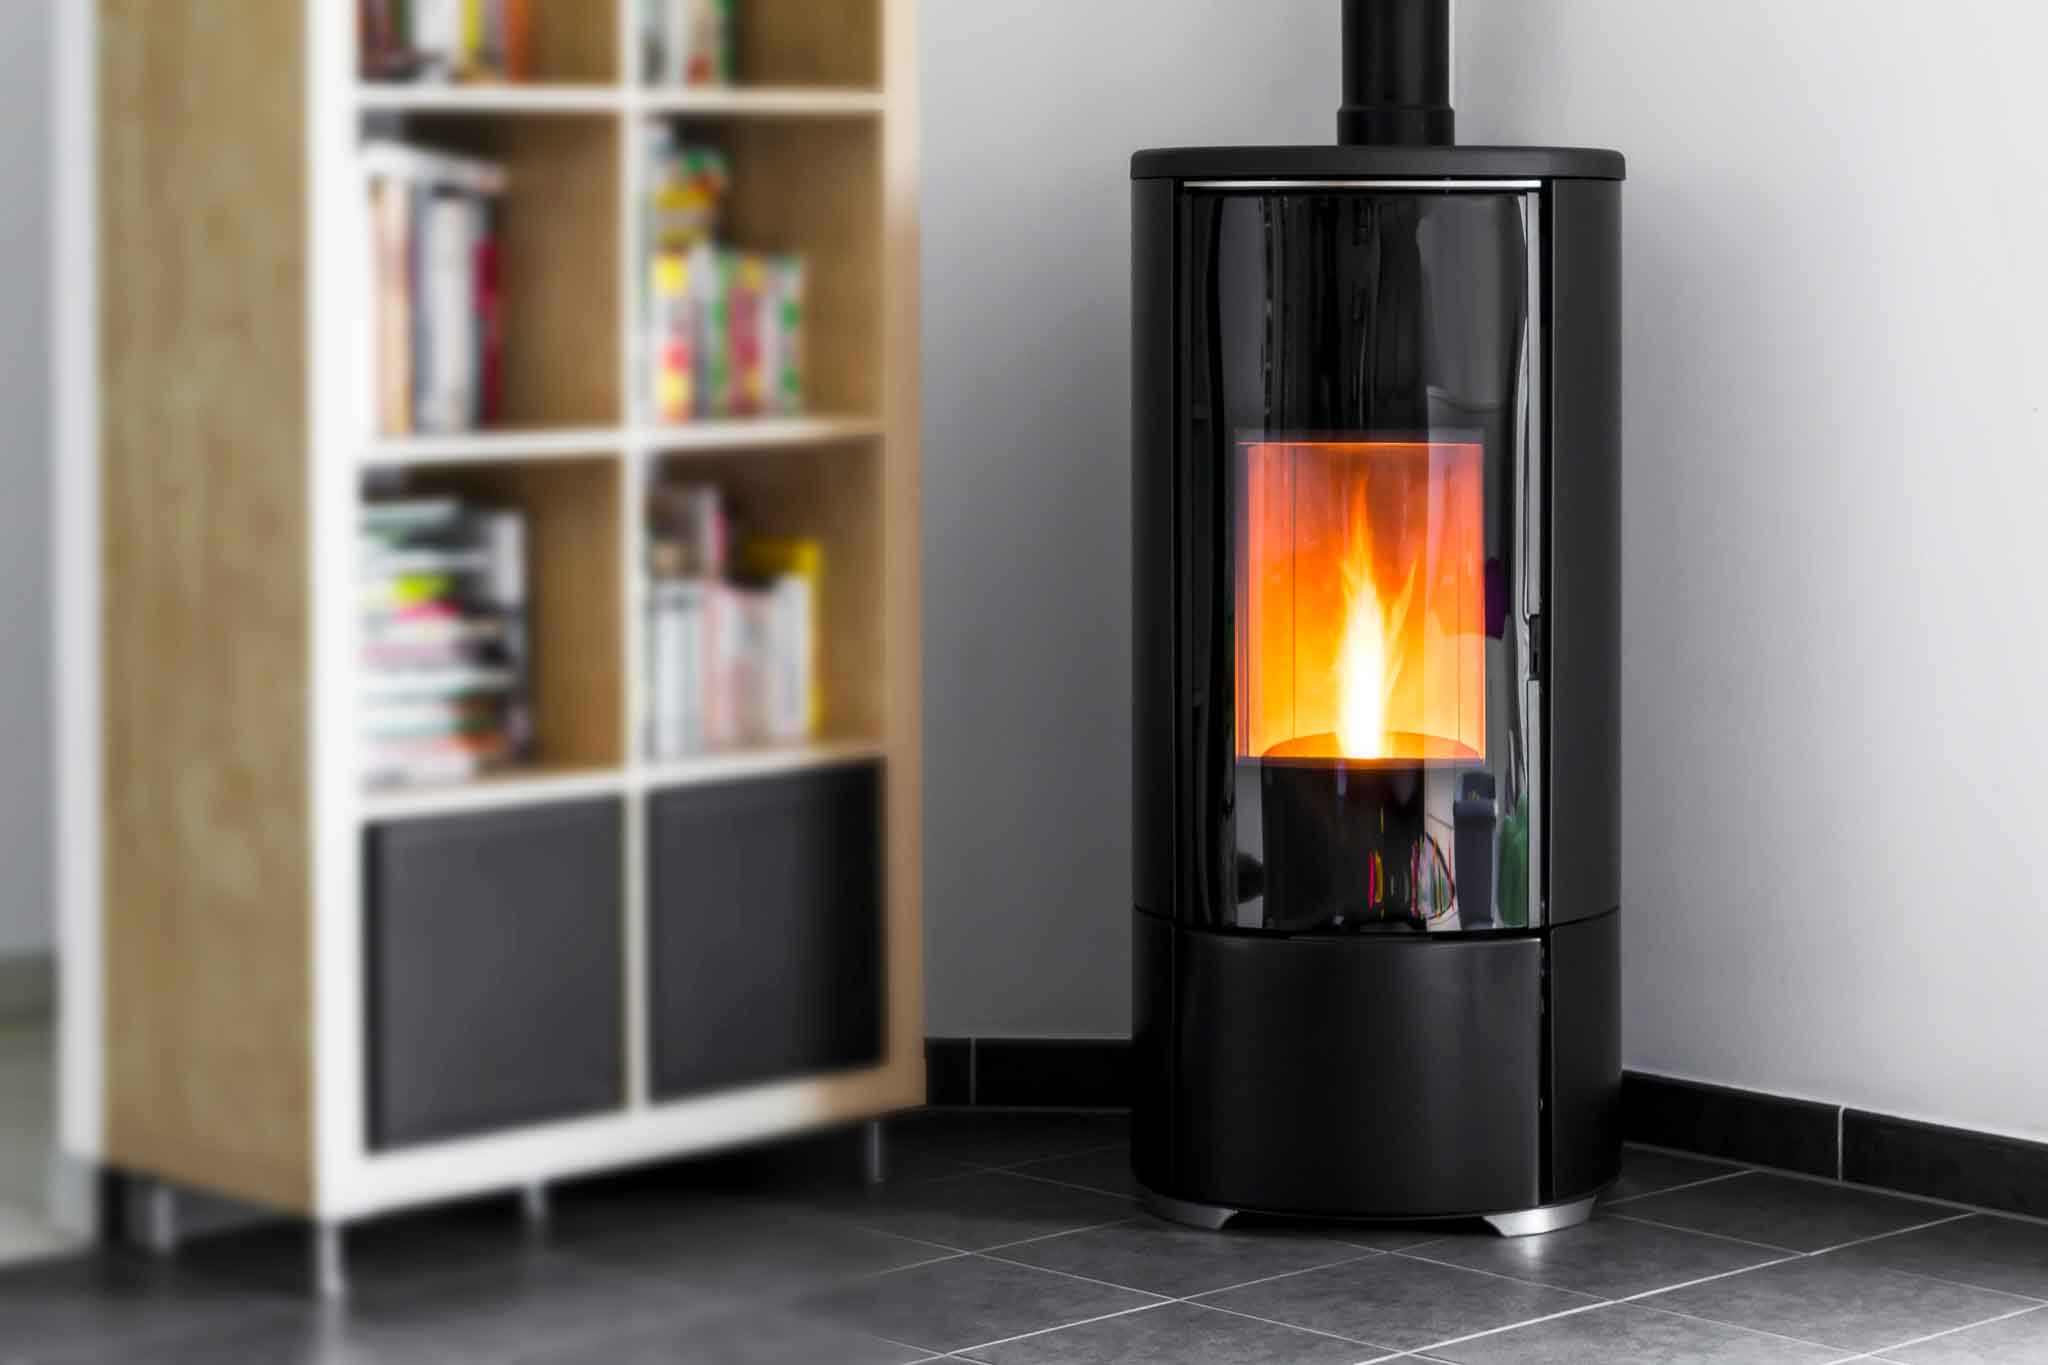 Modern domestic pellet stove, granules stove with flames and lib